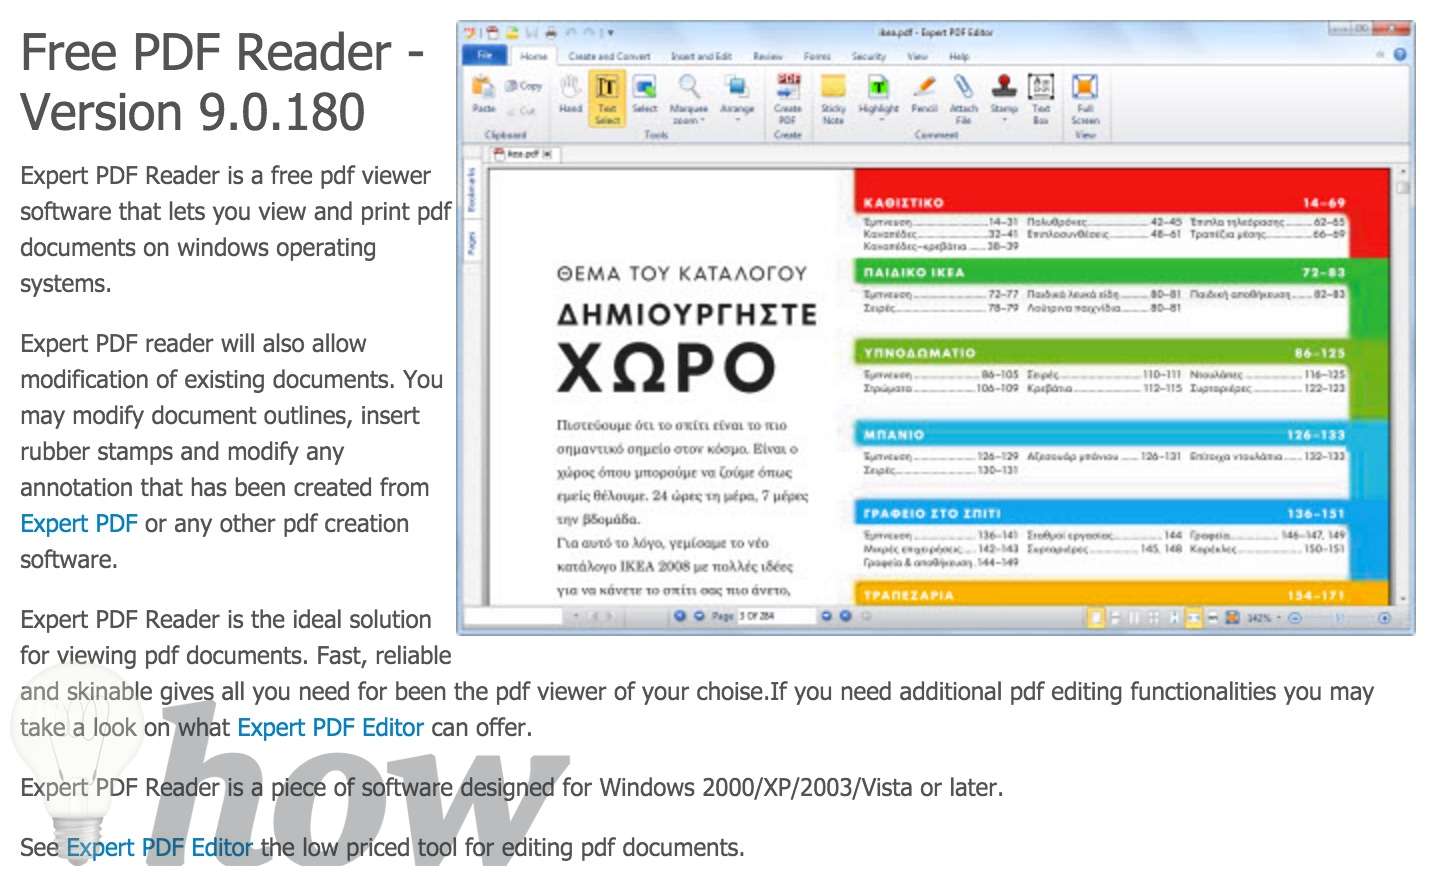 Free Online PDF Editing: Spice Up Your Documents